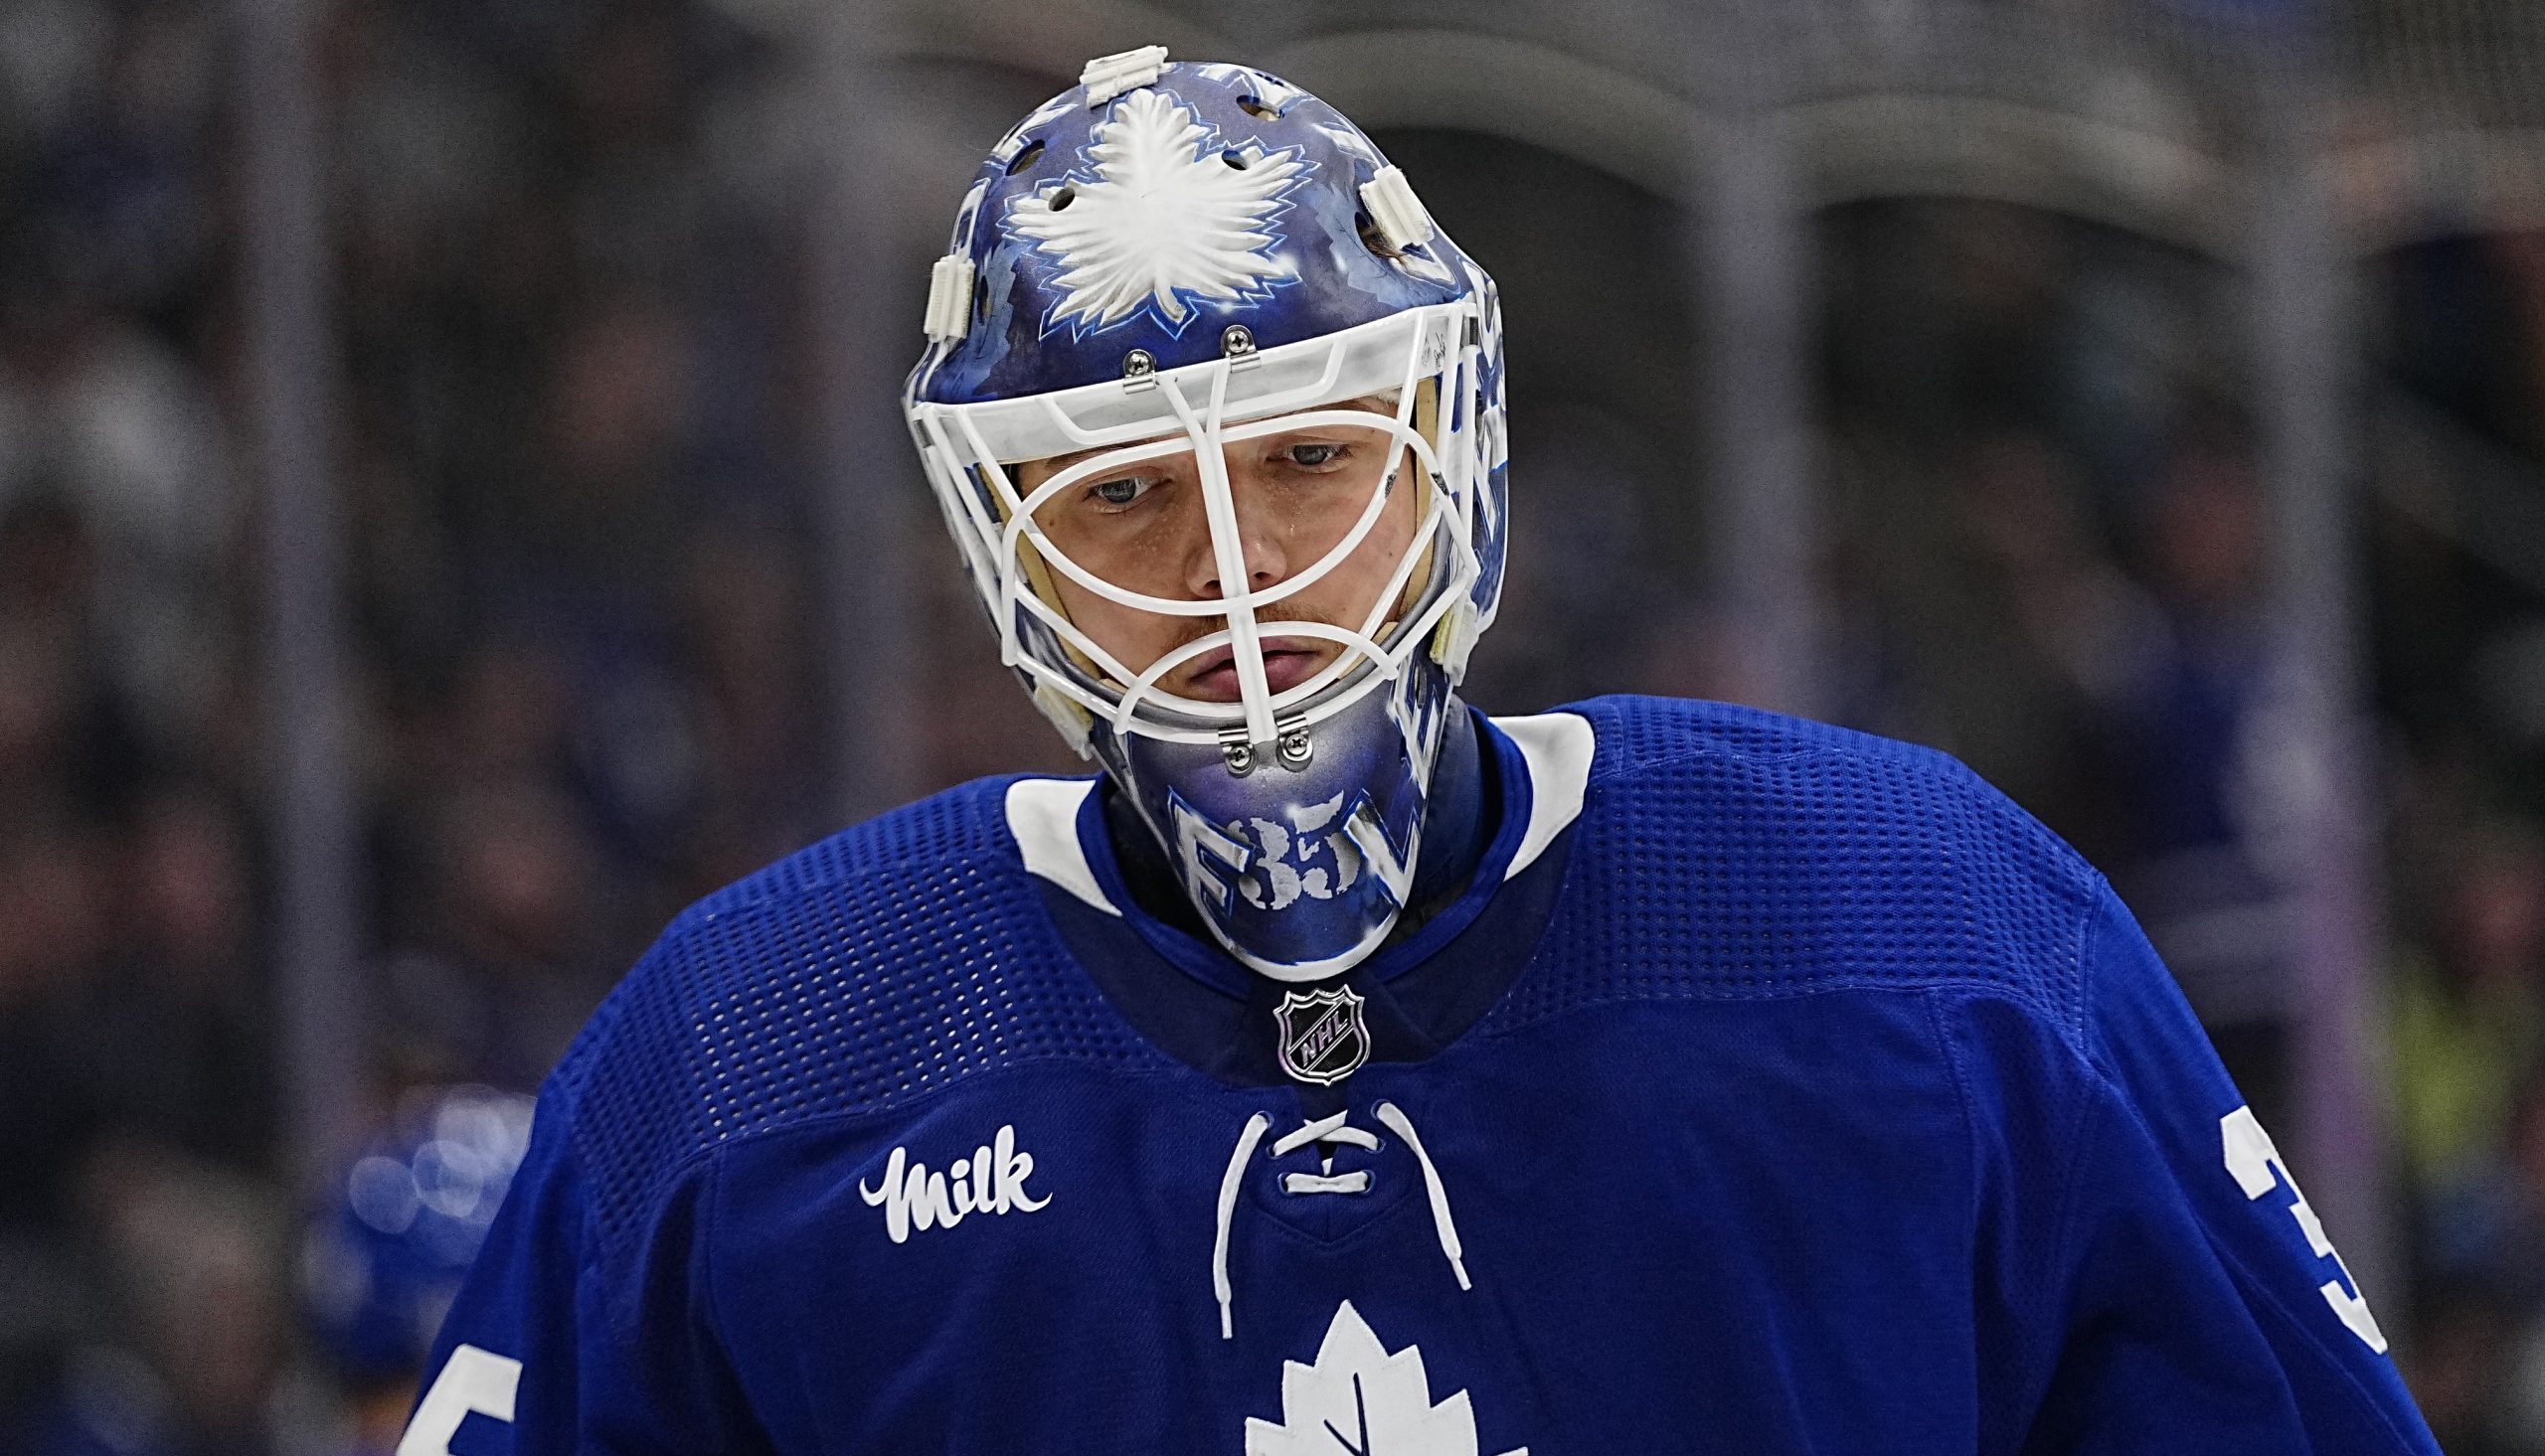 While Sergei Bobrovsky has dominated the first two games of the Panthers vs. Maple Leafs series, Toronto goalie, Ilya Samsonov isn't focused on that.